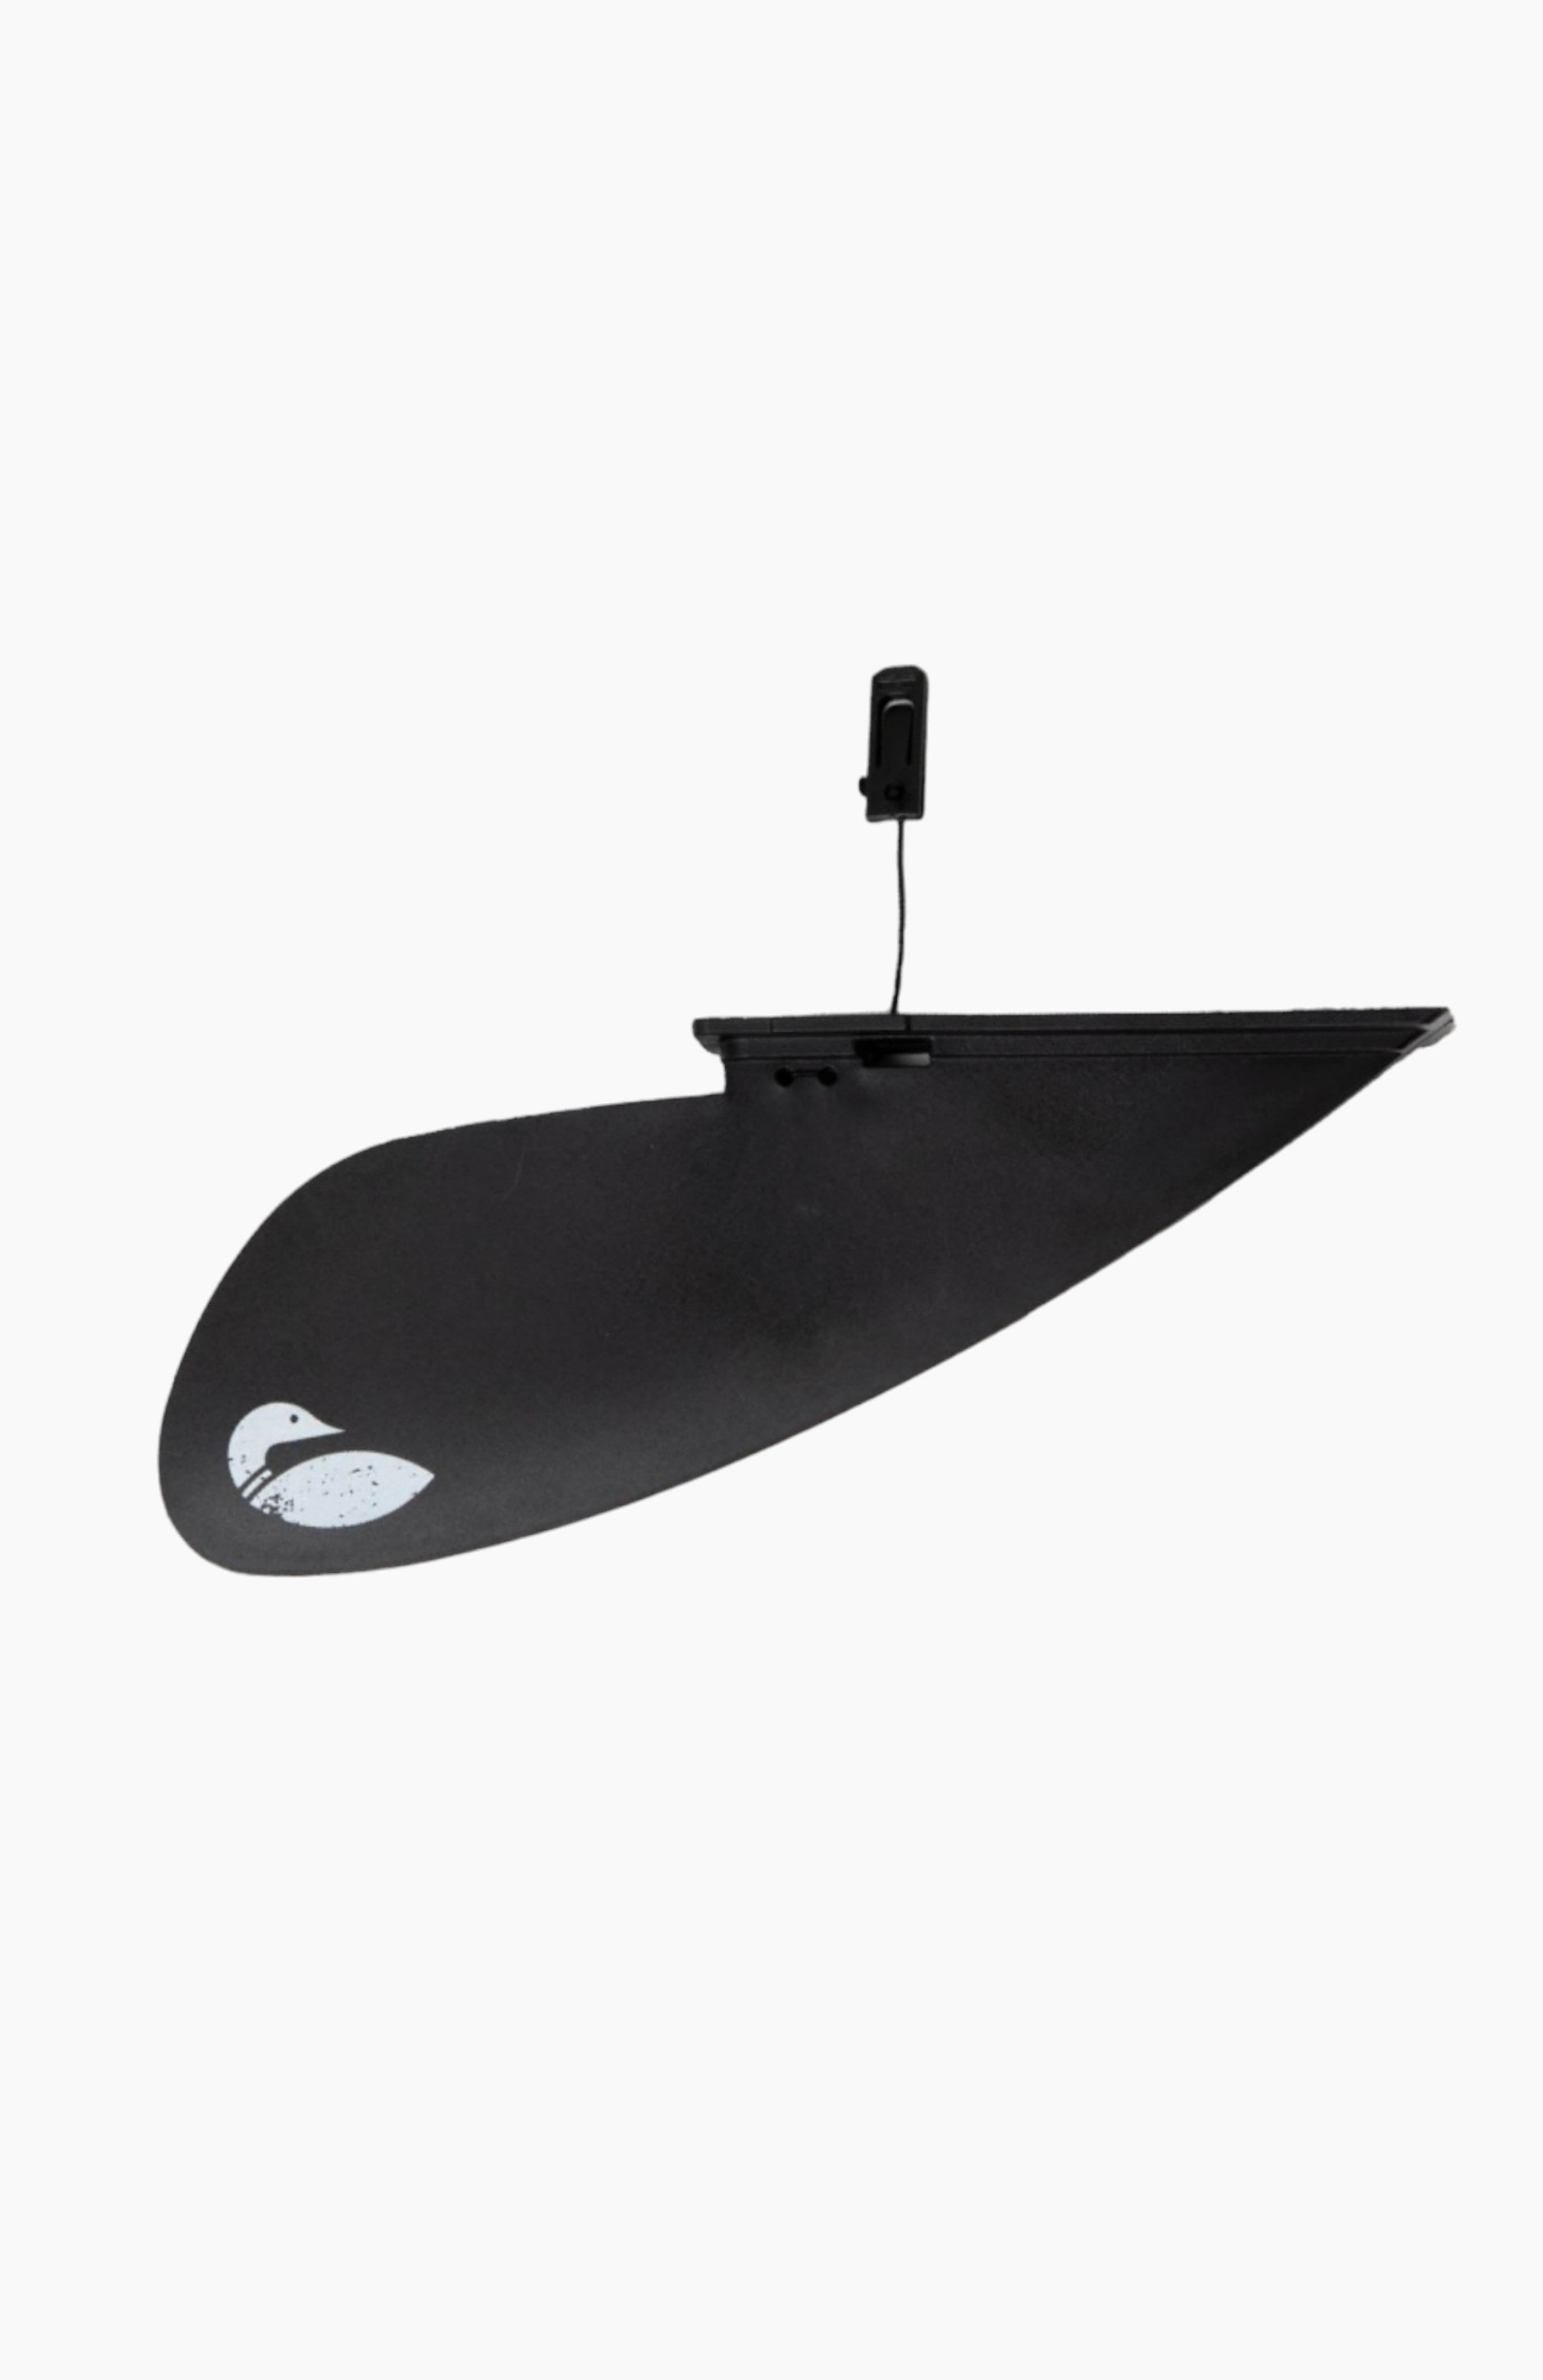 Paddle board accessories: black detachable shallow water fin for paddle boards.